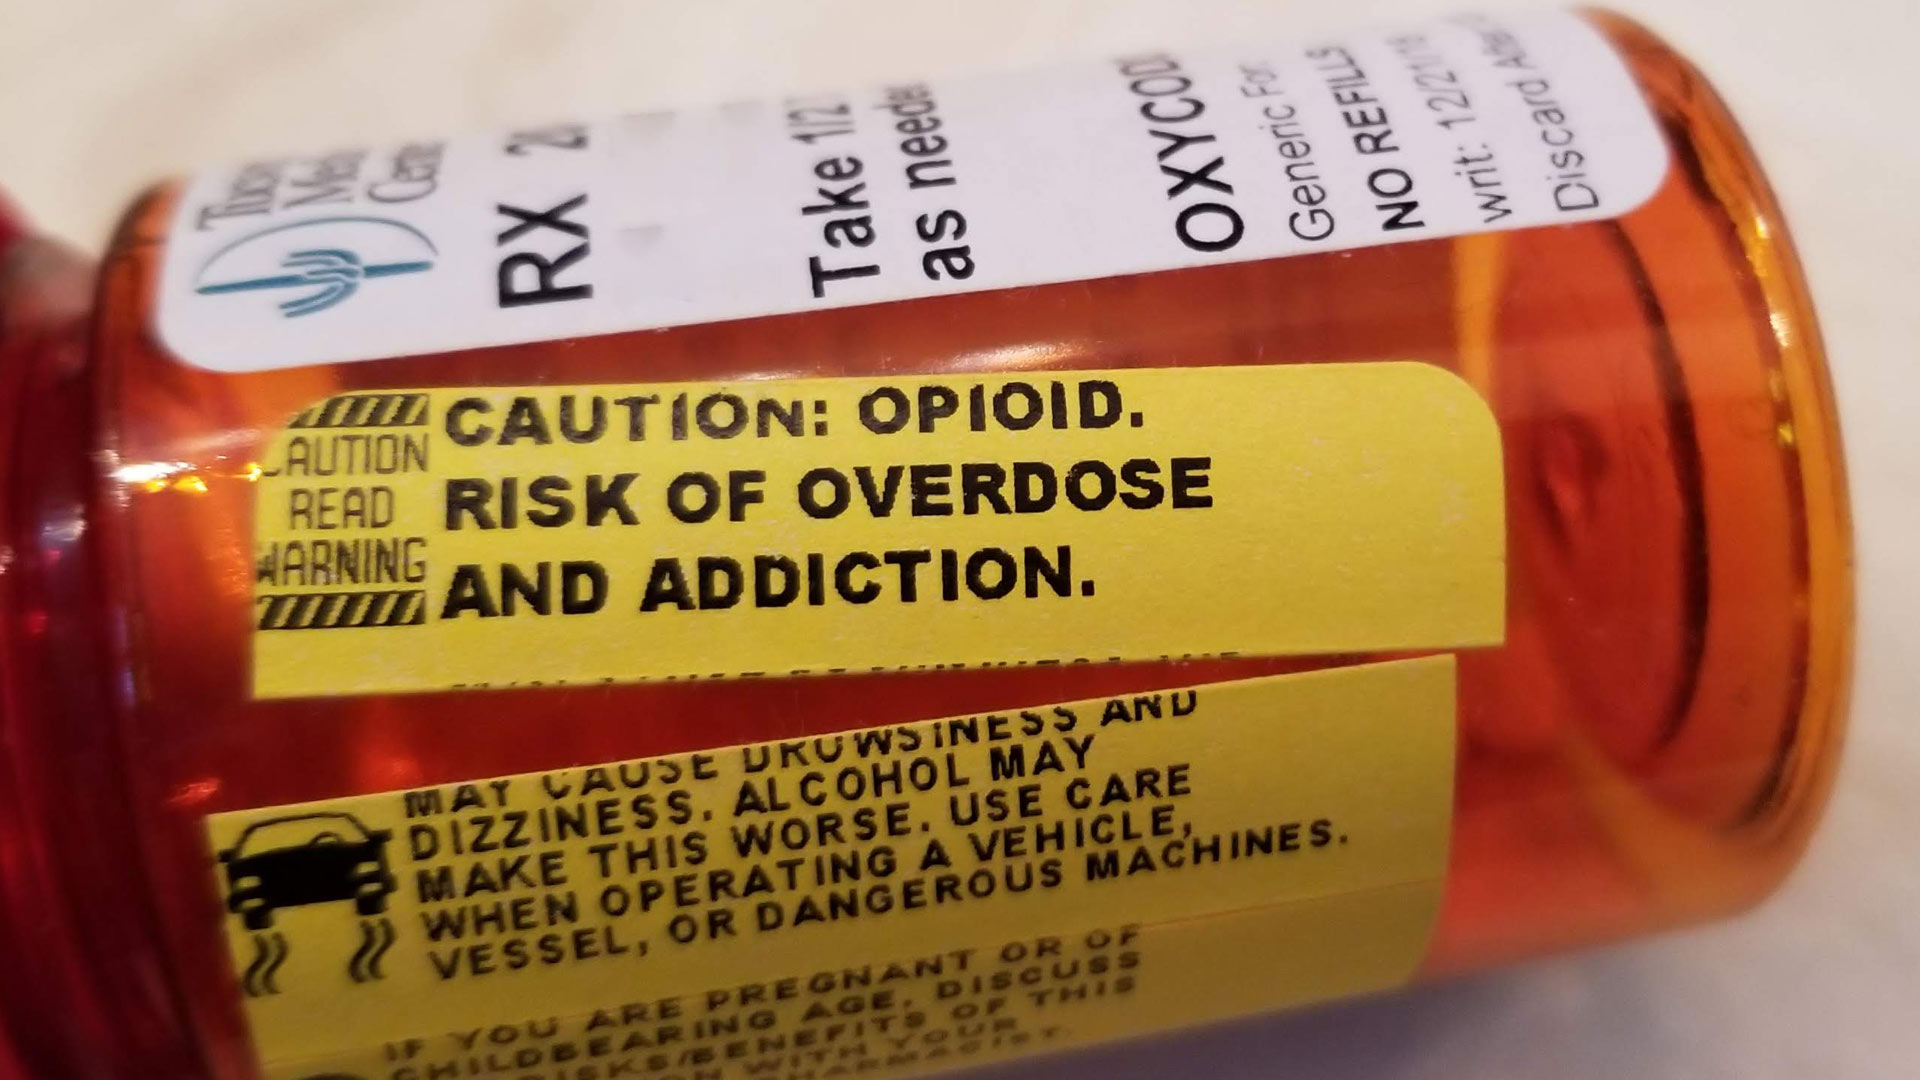 A warning label for opioid addiction on an oxycodone bottle.